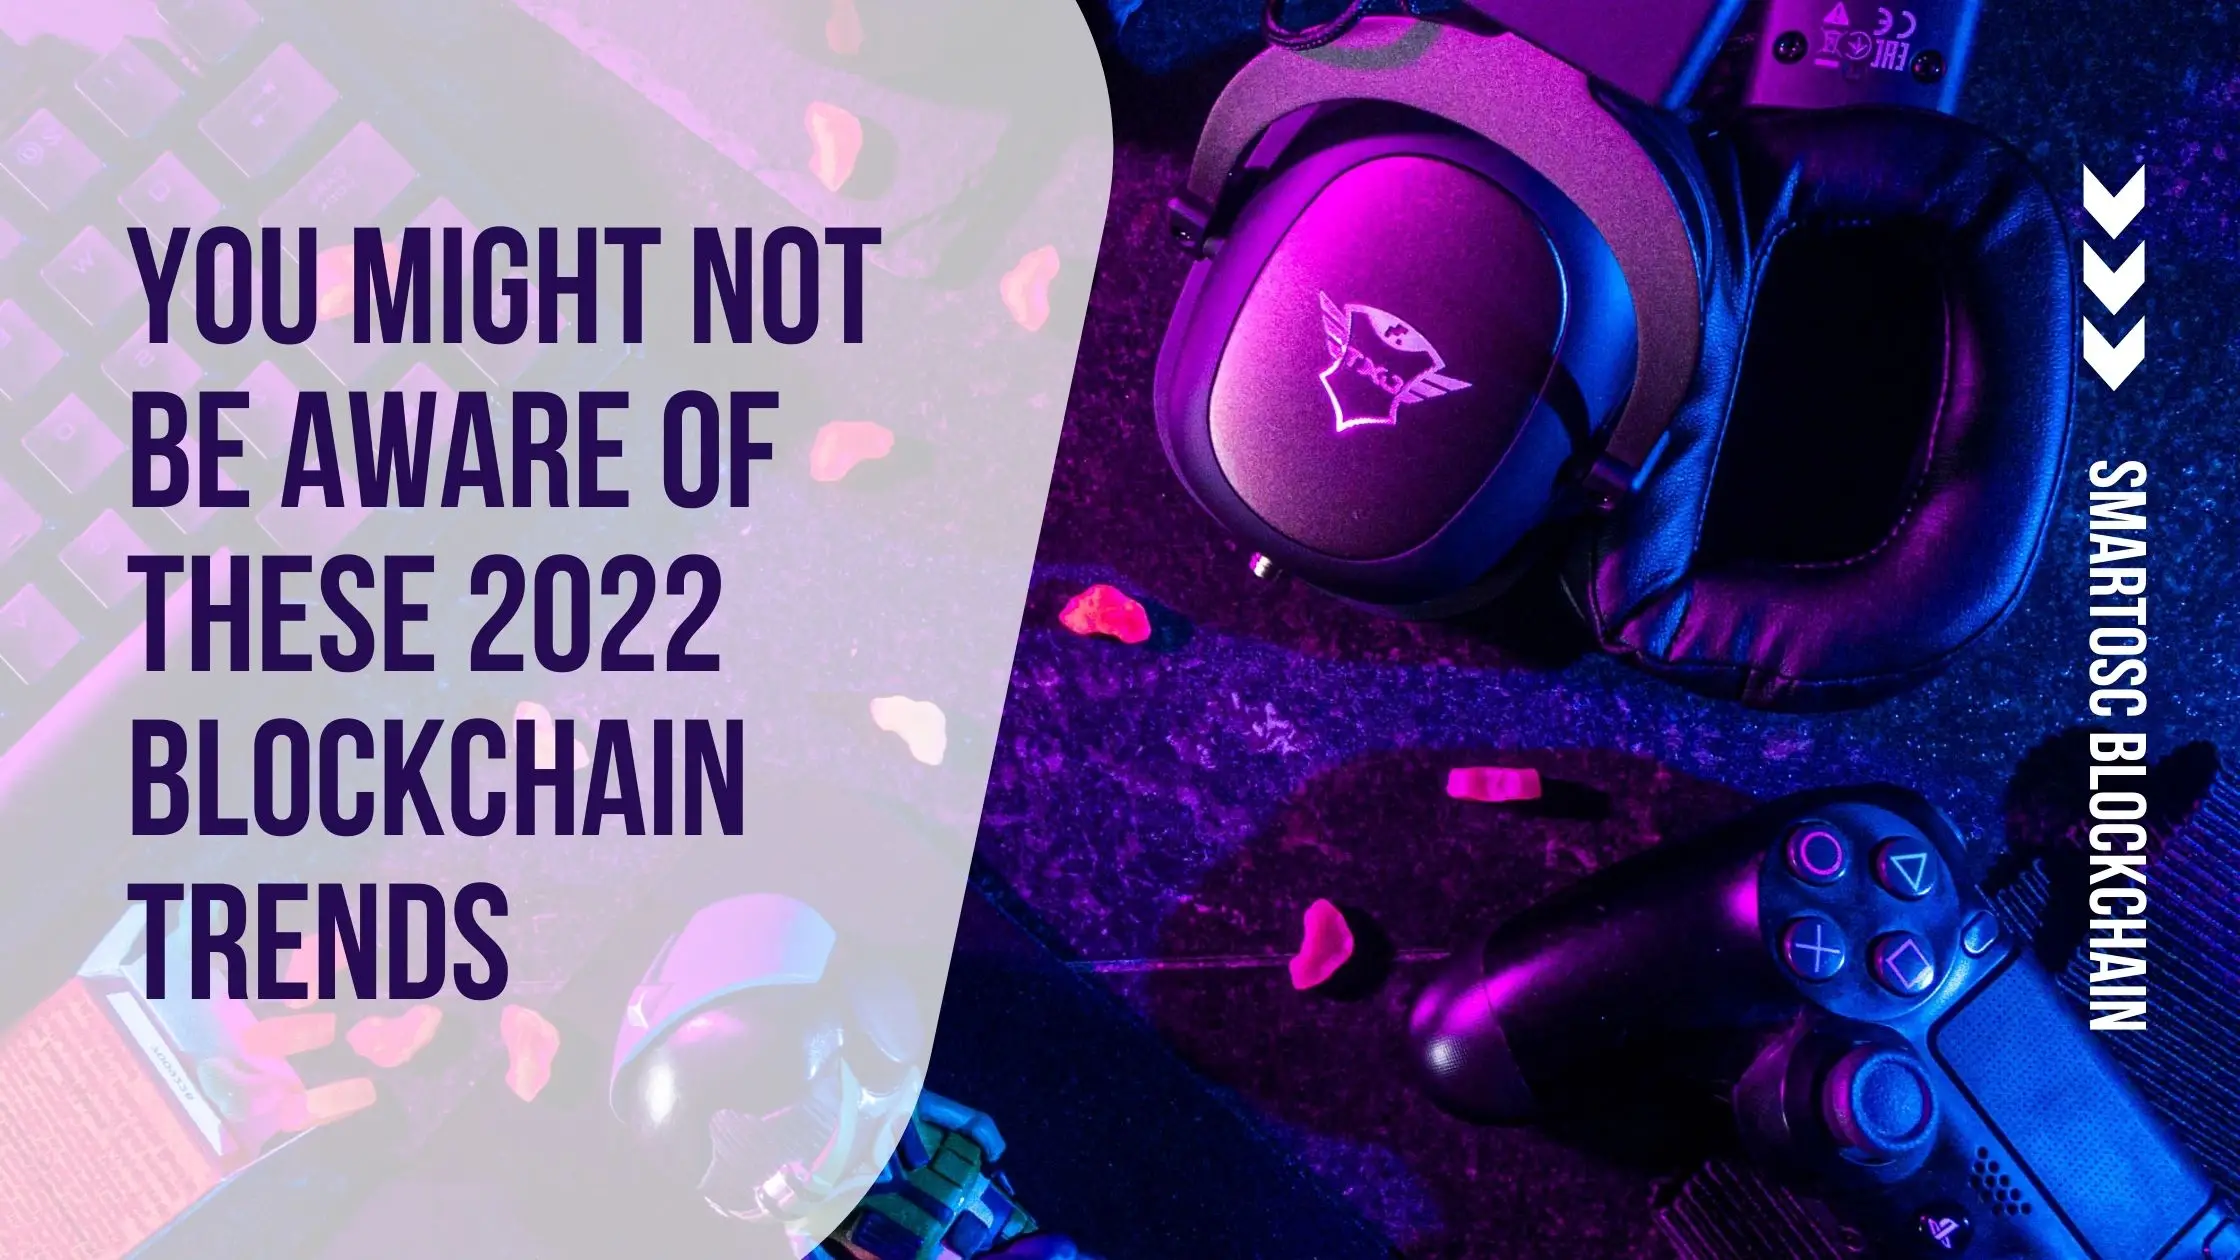 You might not be aware of these 2022 blockchain trends